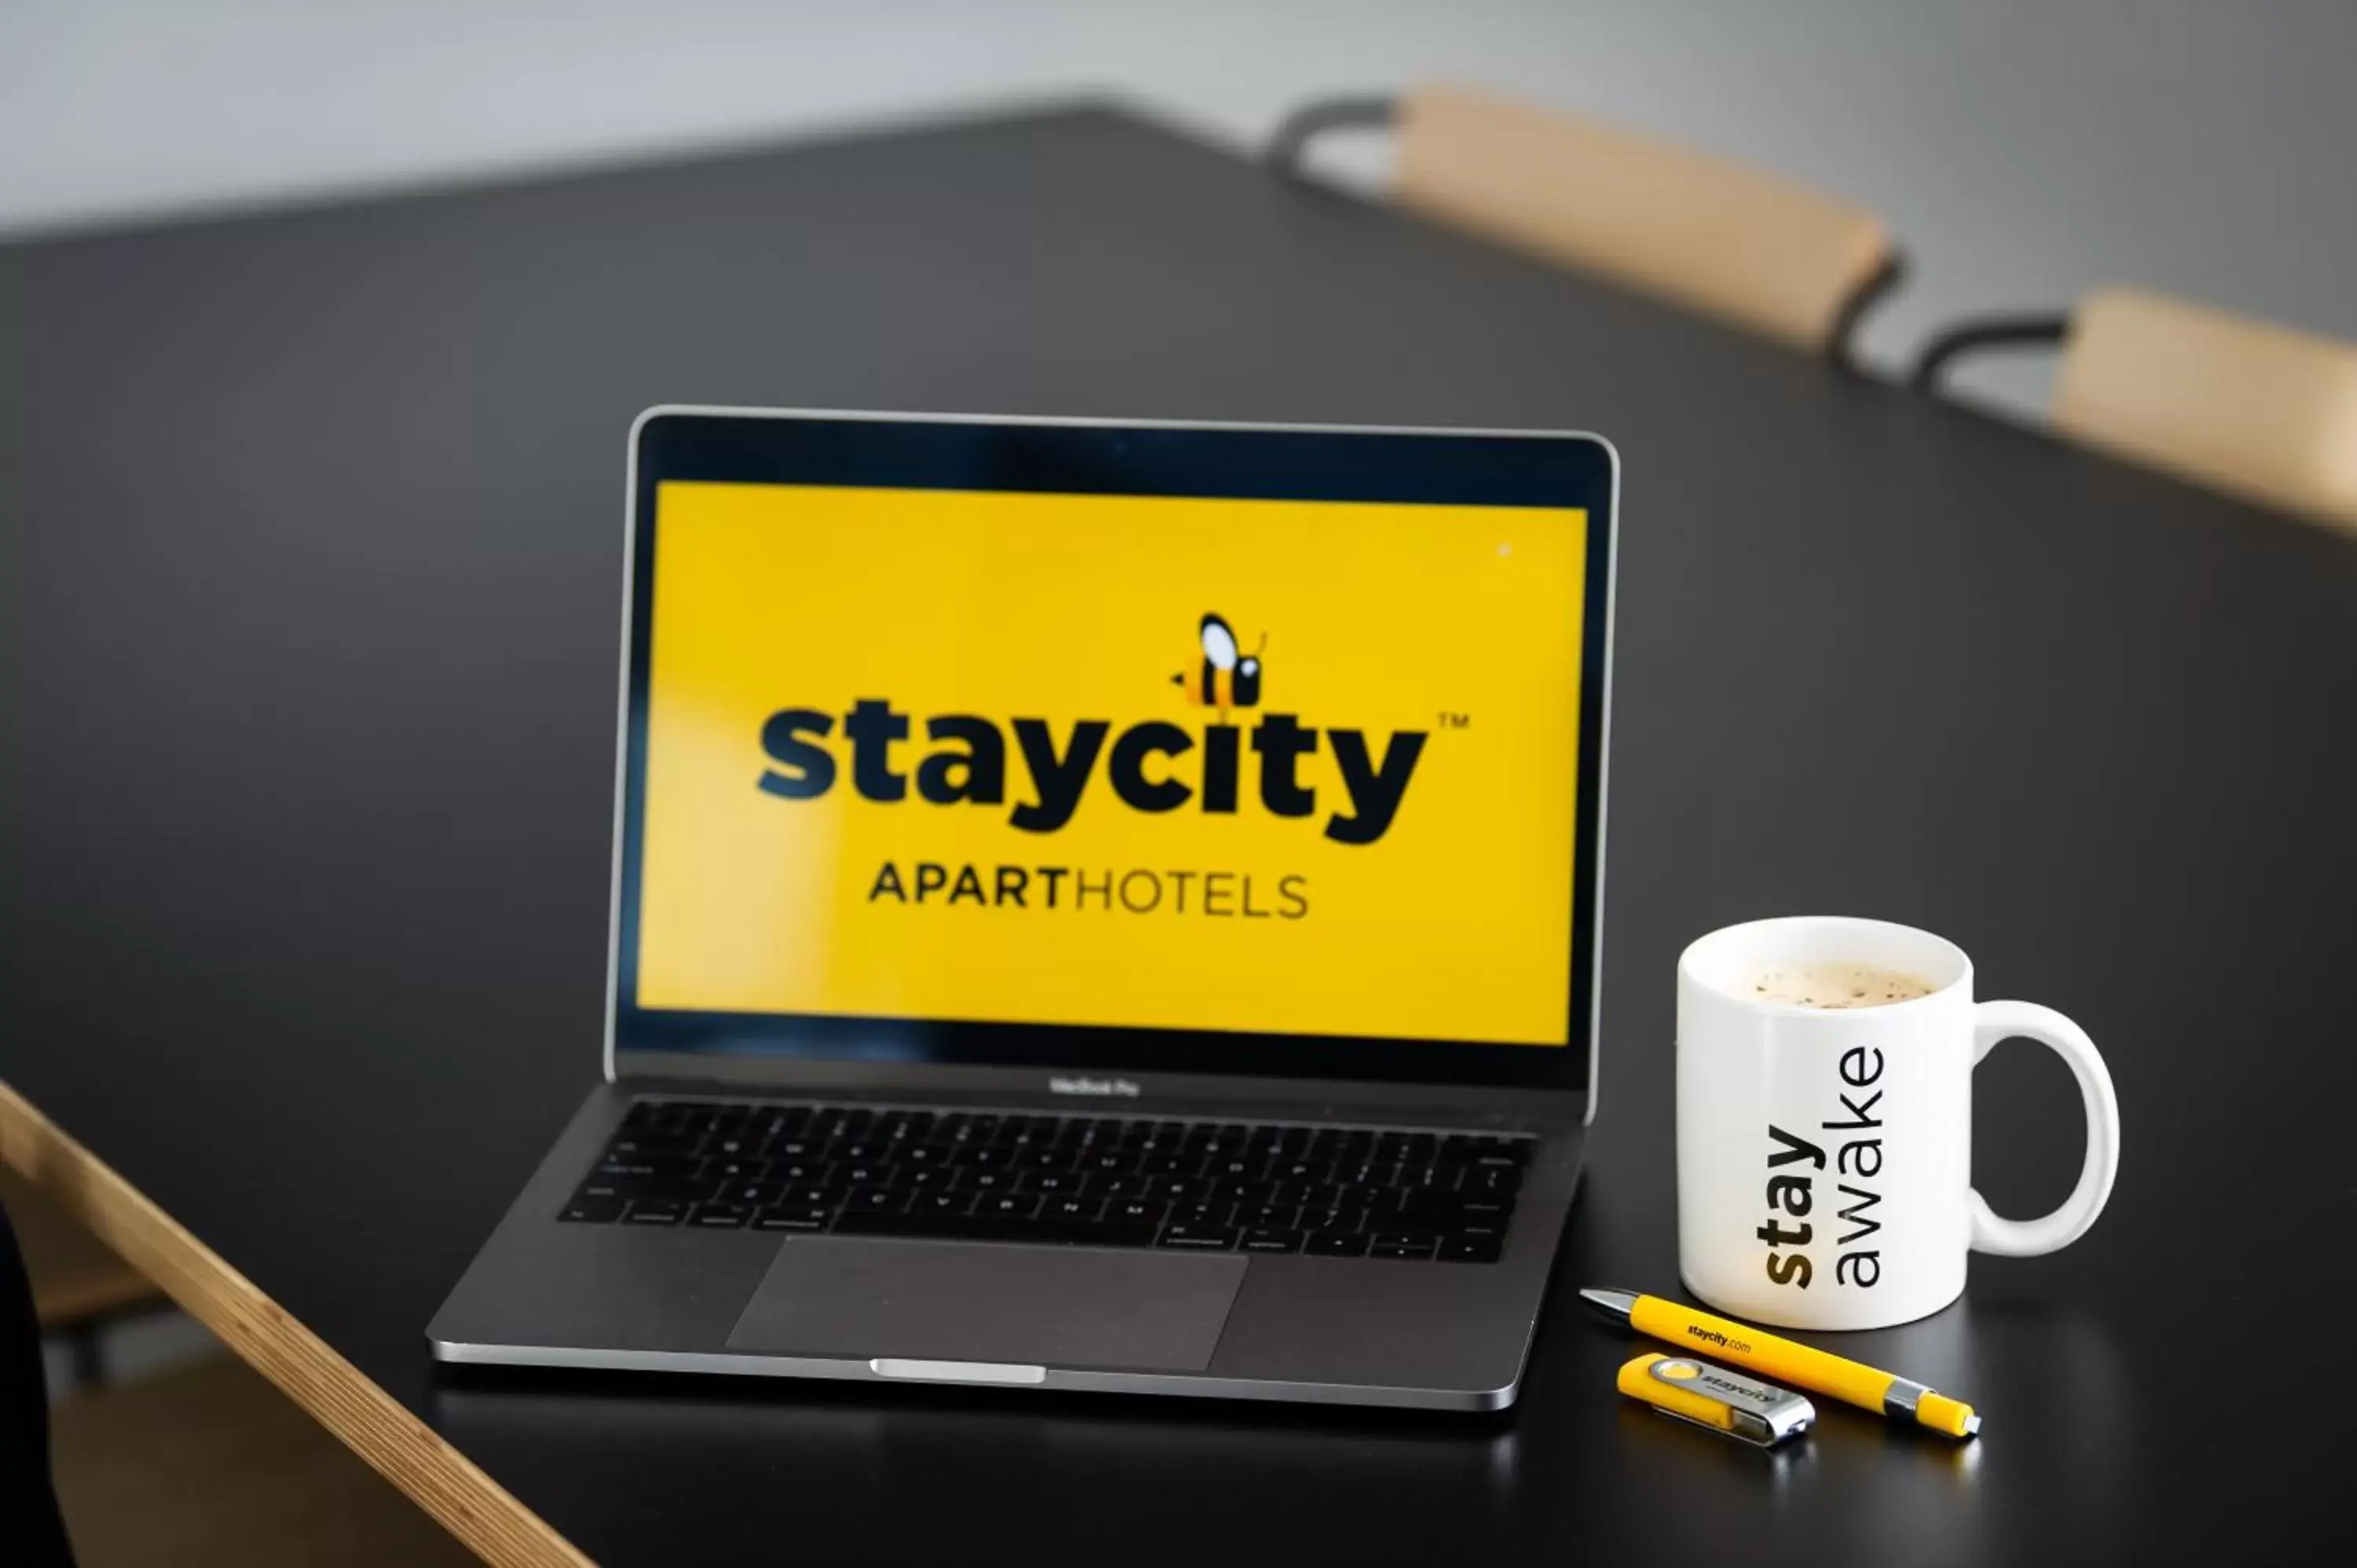 Business facilities in Staycity Aparthotels West End